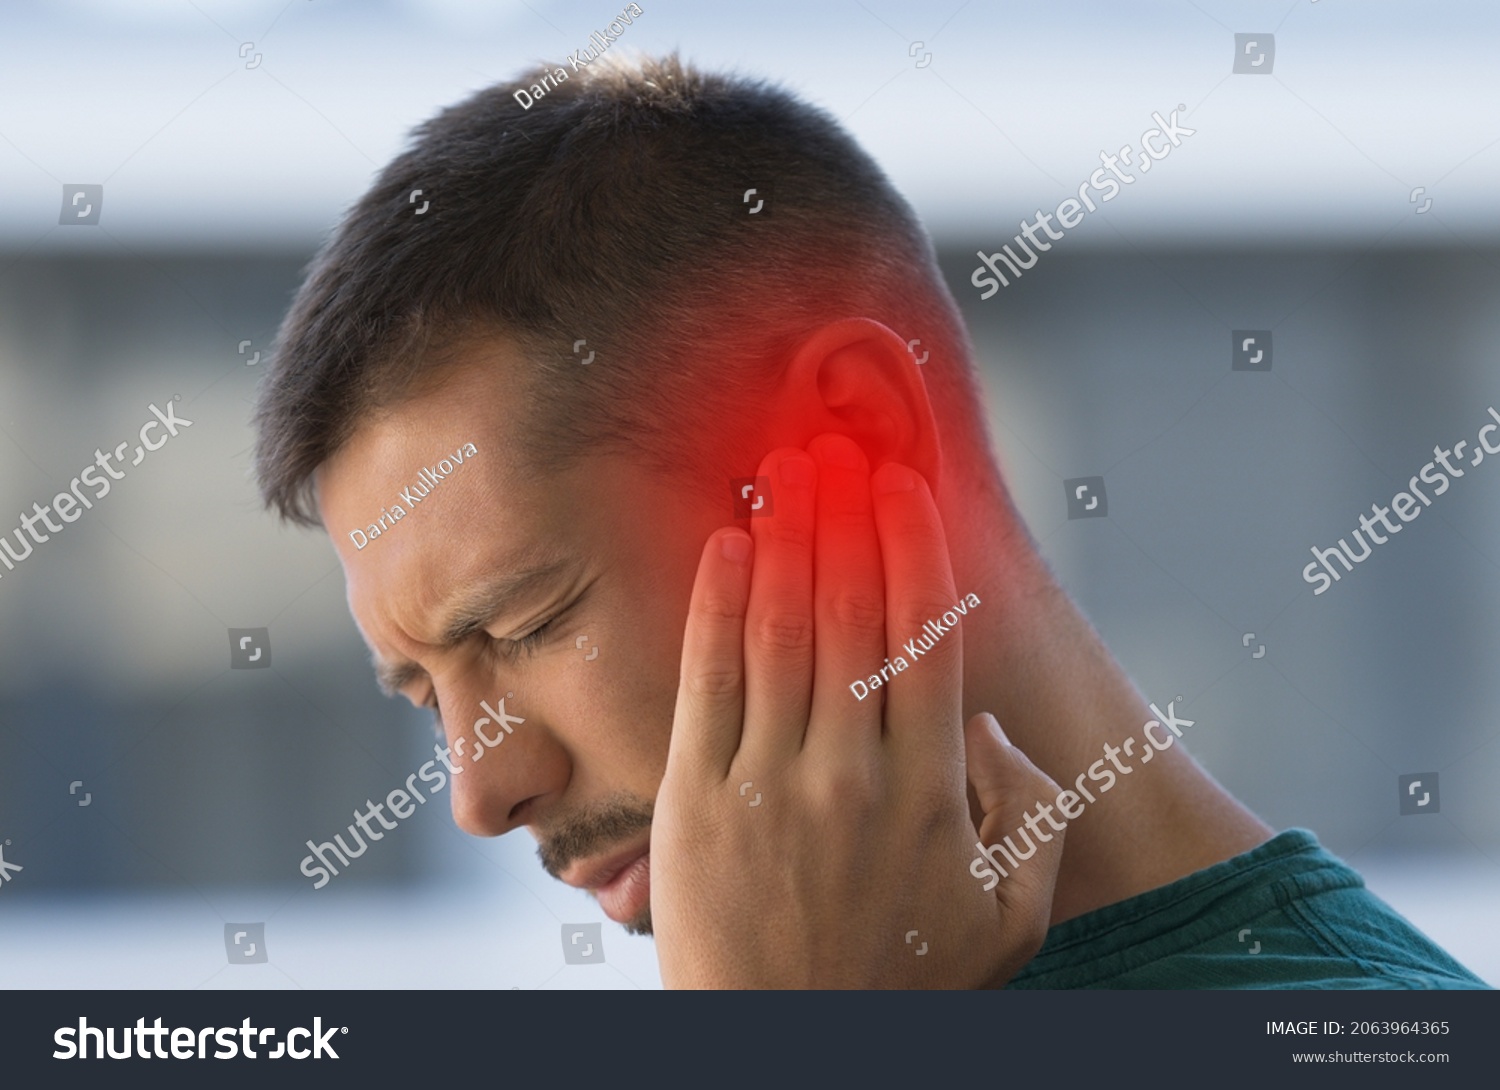 Man suffering from strong earache or ear pain. Ear inflammation, otitis or tinnitus #2063964365